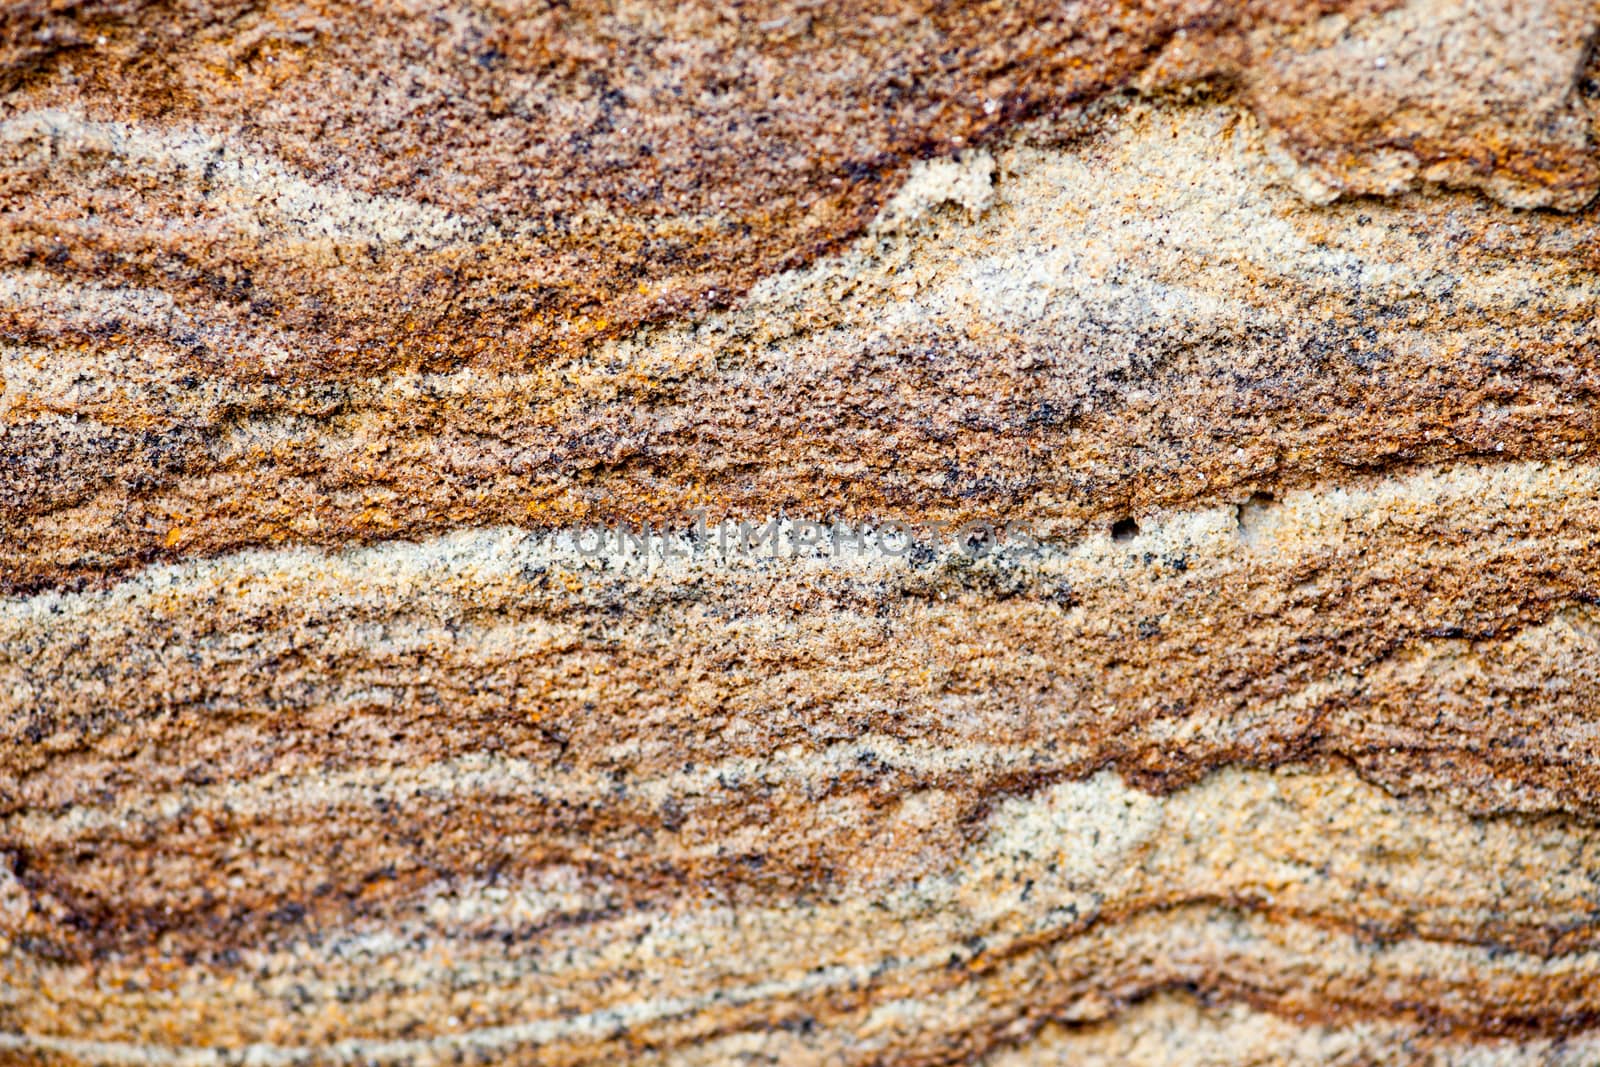 Sandstone surface with rich and various texture.